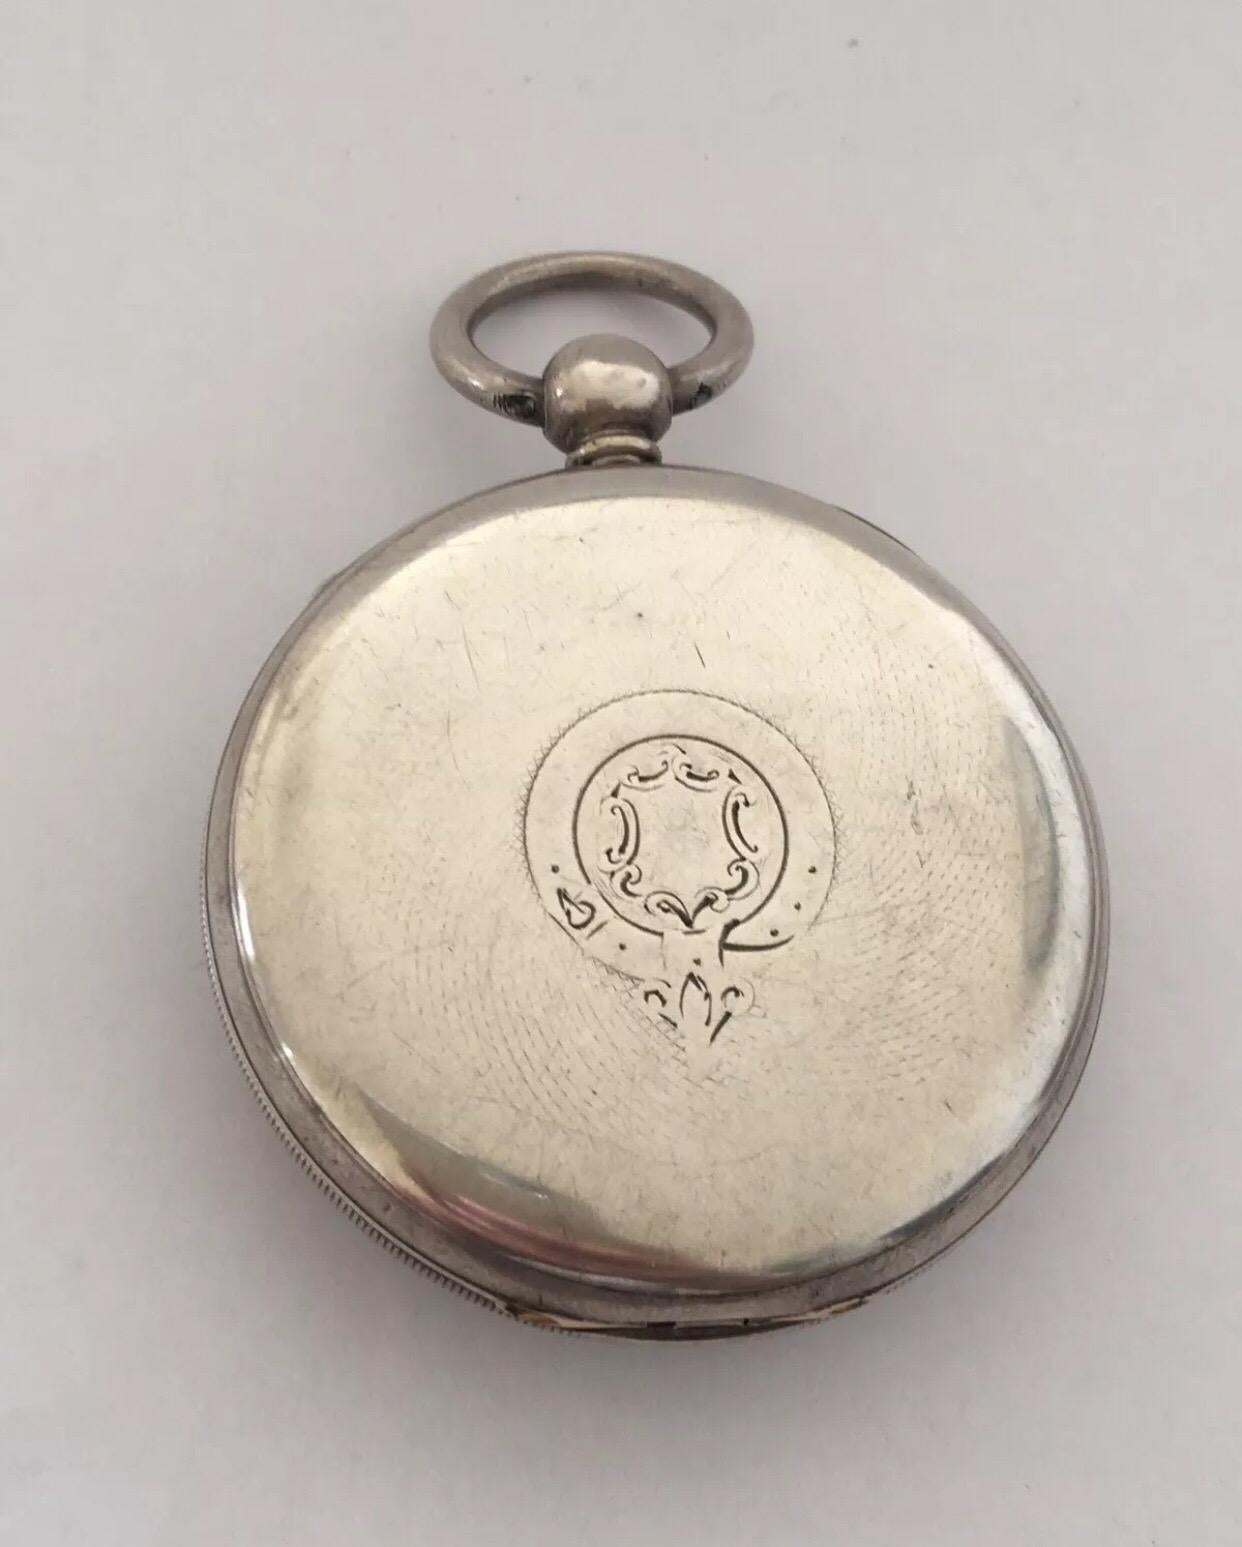 Rare English Lever centre seconds Chronograph Silver Pocket watch signed Johnson Grounds, Wigan.


This beautiful pre-owned antique watch is in good working condition and it is recently been serviced. Visible signs of ageing and wear with small